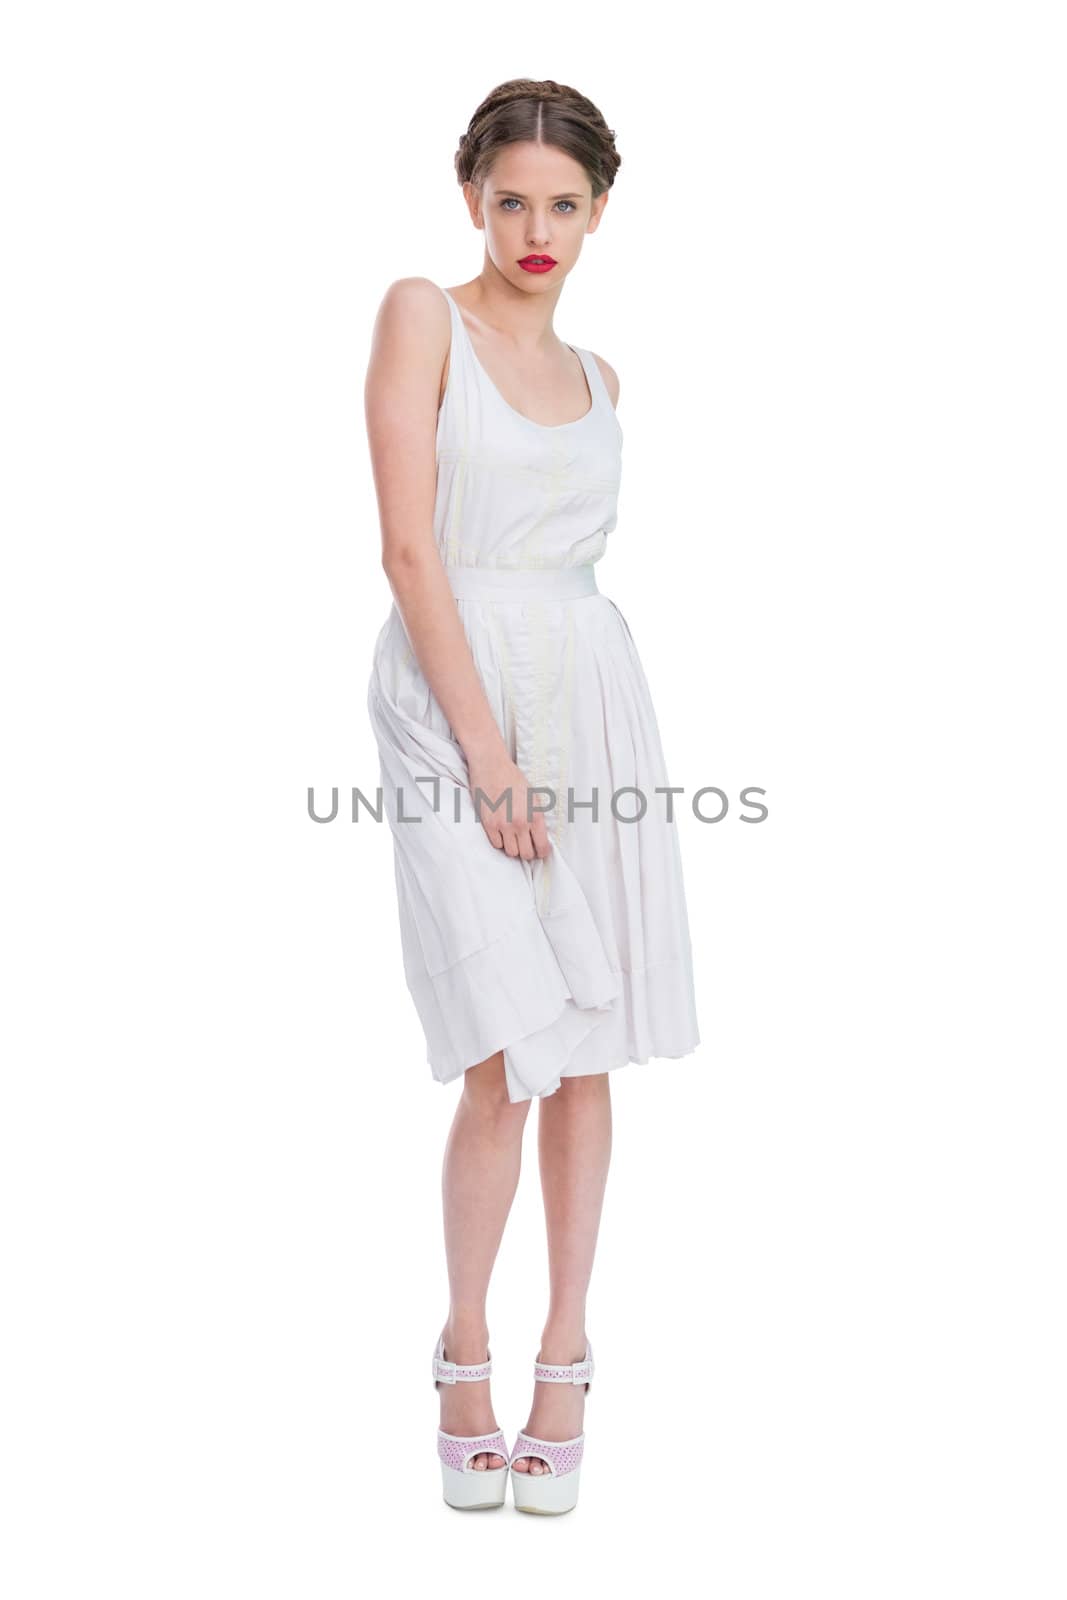 Attractive woman wearing white summer dress standing against white background